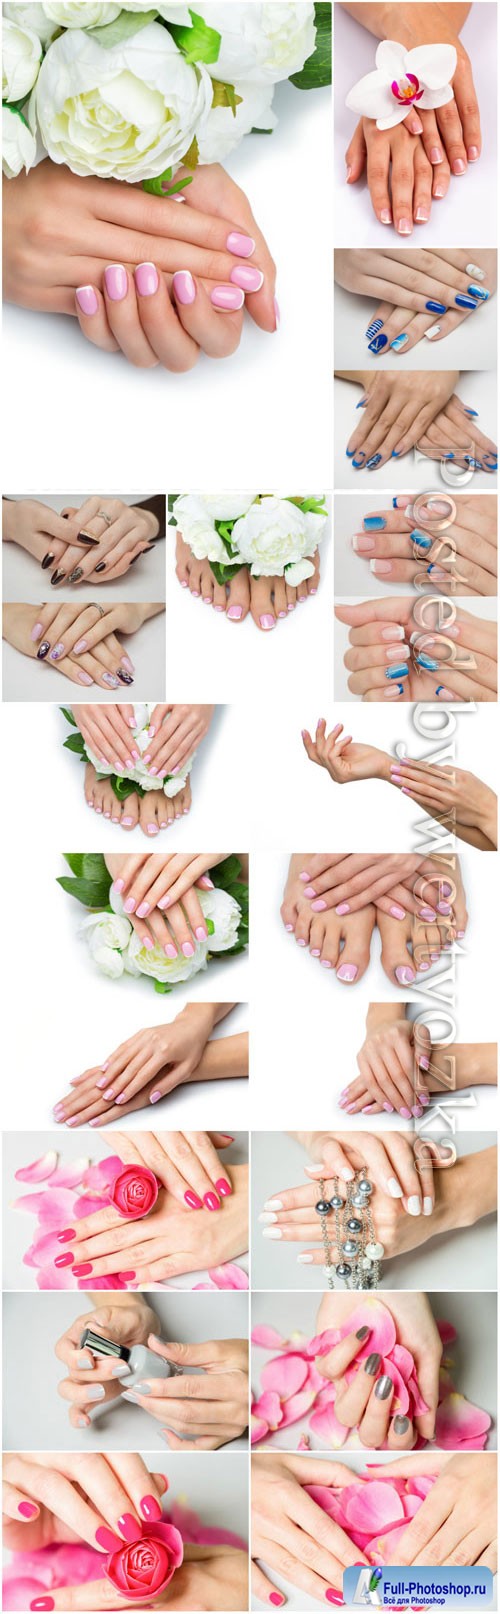 Pedicure and manicure, beautiful handles with flowers stock photo